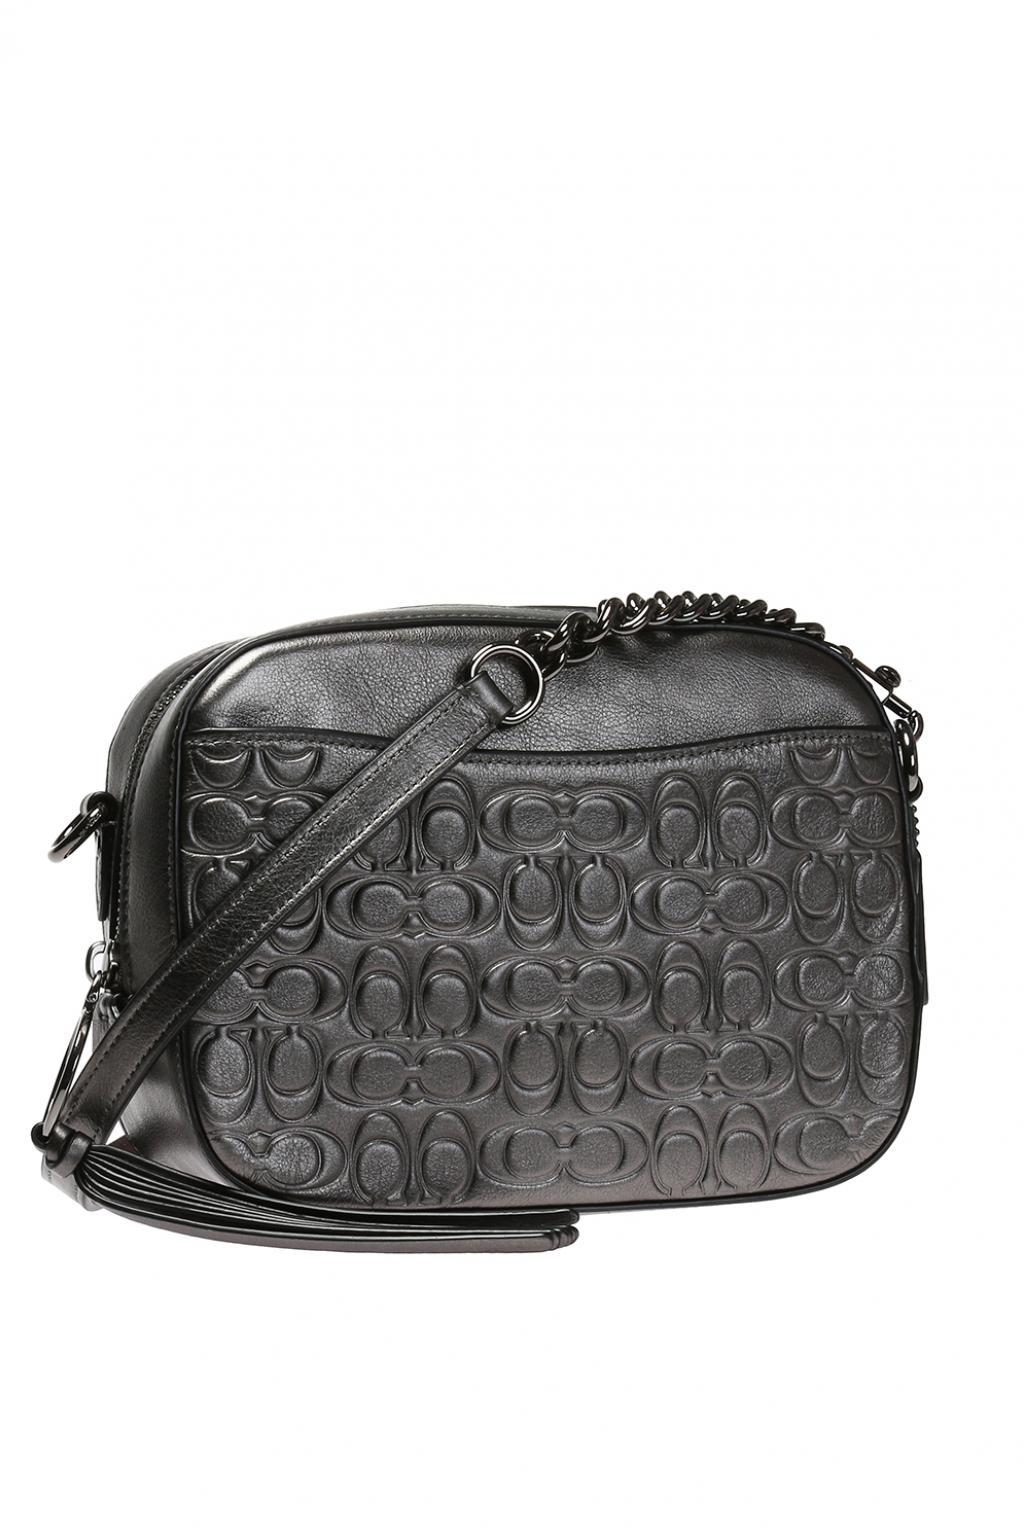 COACH Leather Fringed Shoulder Bag in Grey (Gray) - Lyst